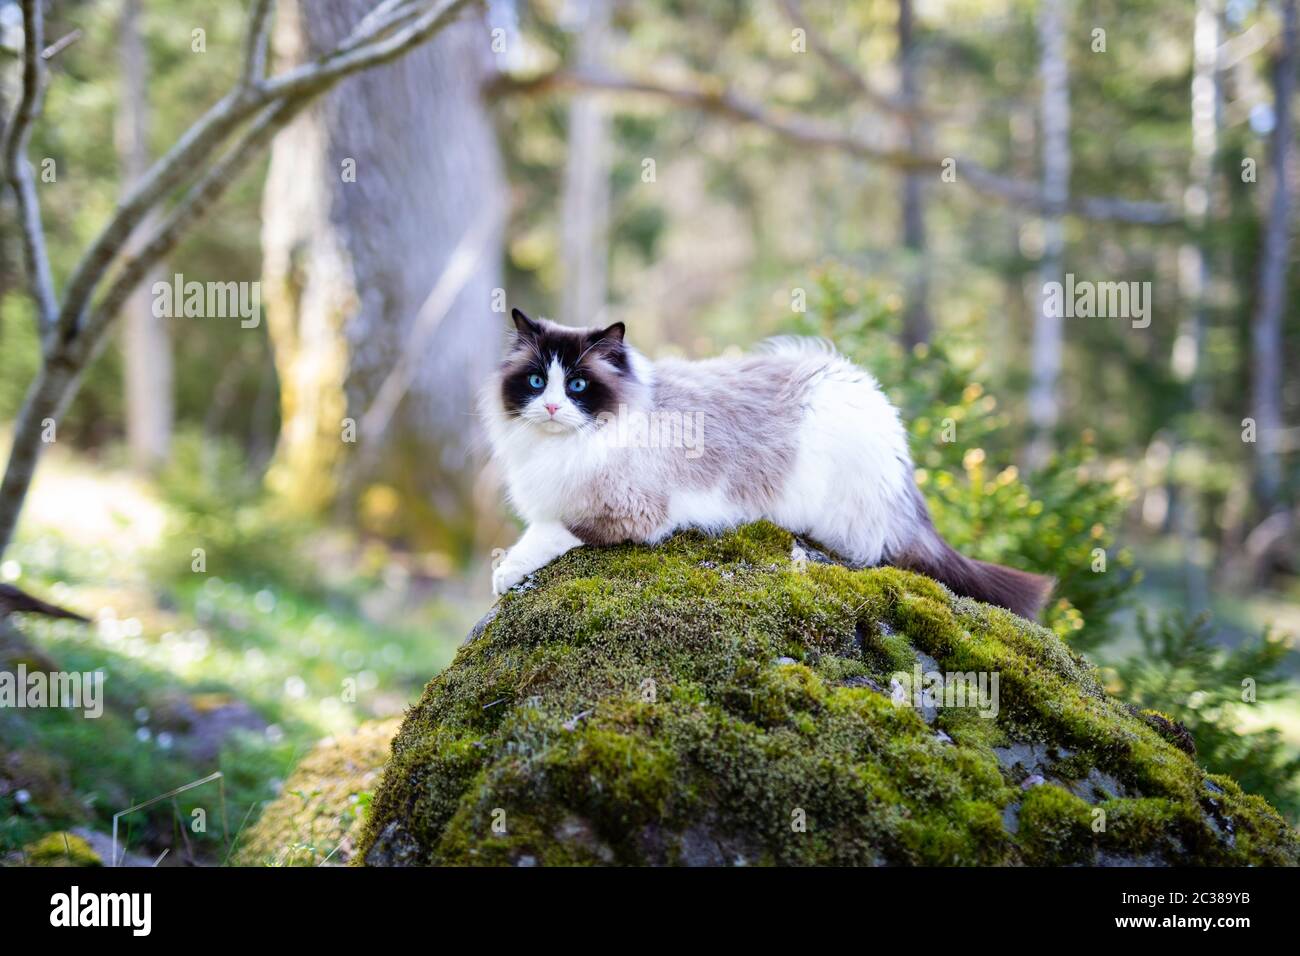 A pretty purebred Ragdoll cat brown bicolor in the forest. The cat is resting on a stone with moss on top, and she is looking out in the woodland. Stock Photo